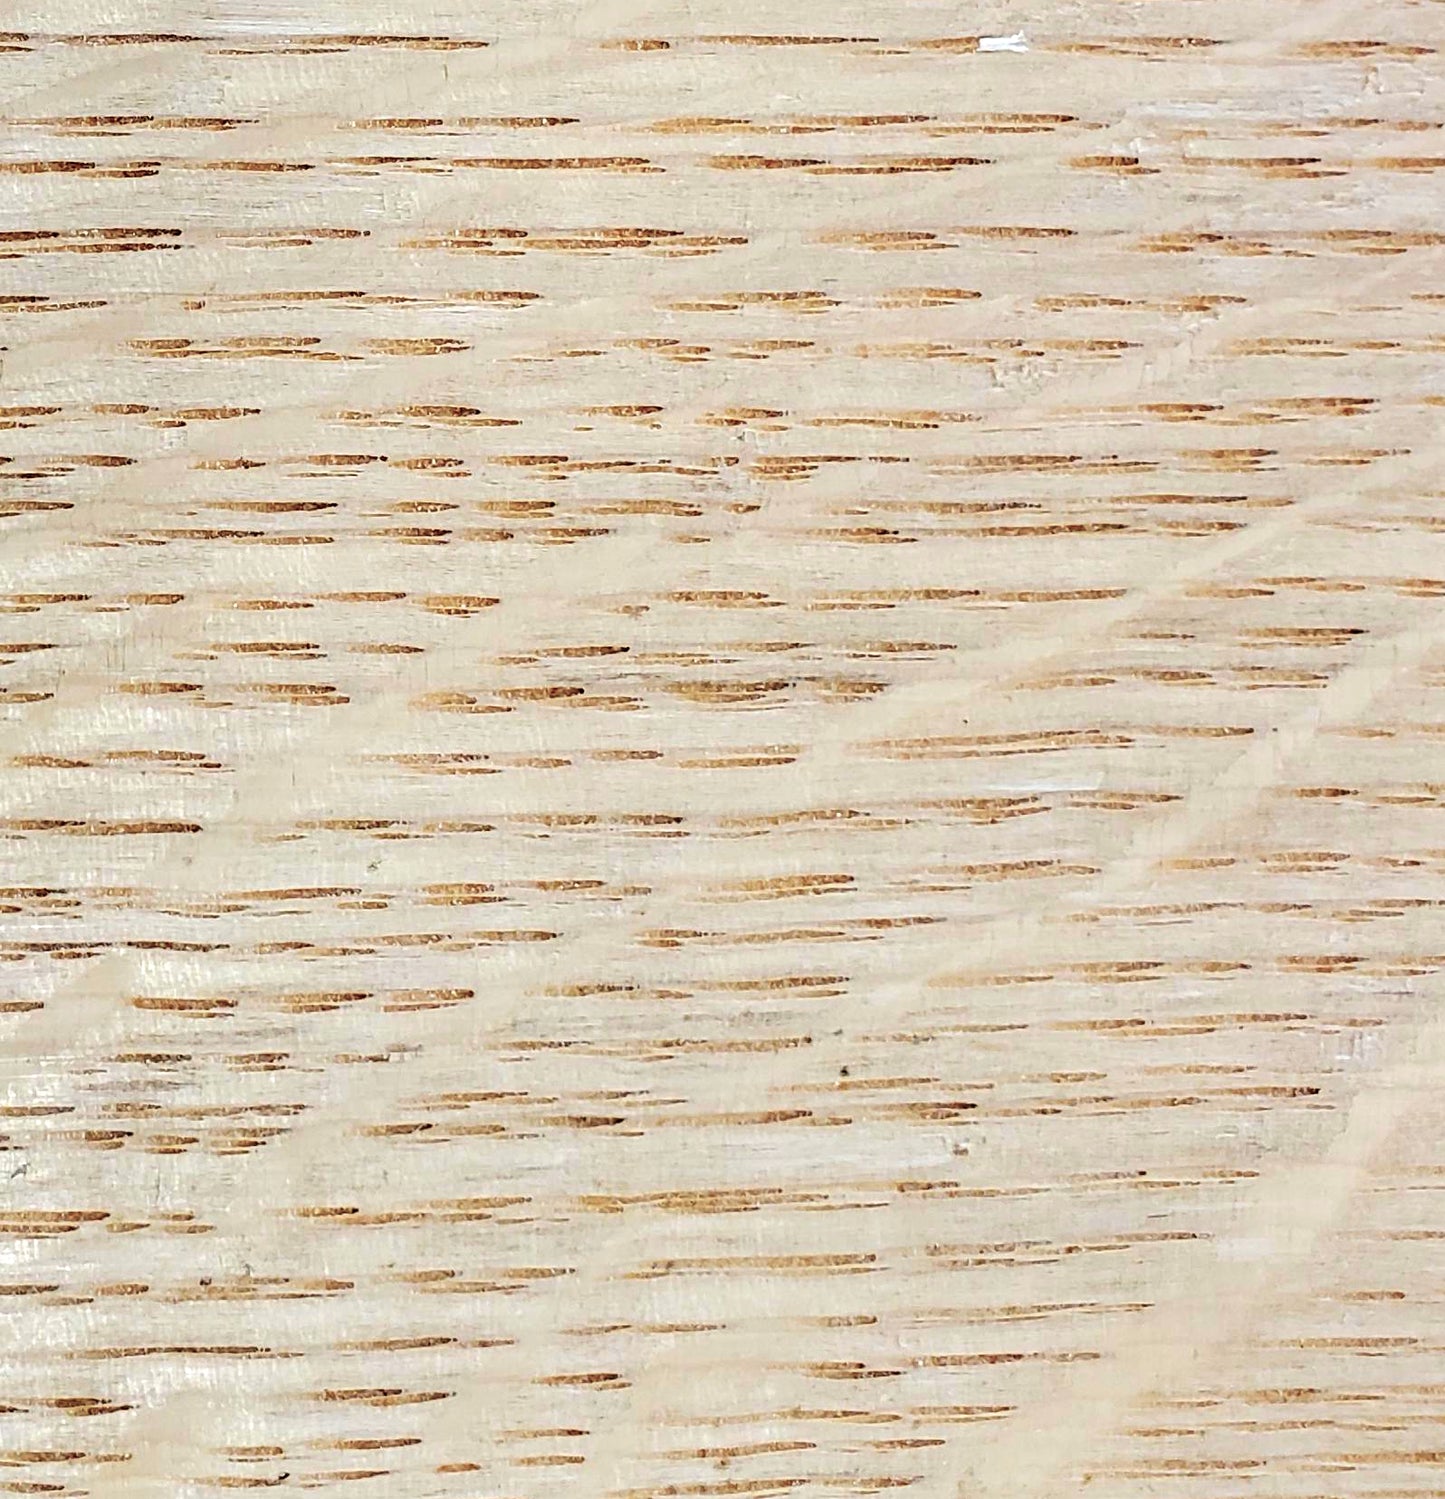 Oak, White Quartered - A&M Wood Specialty